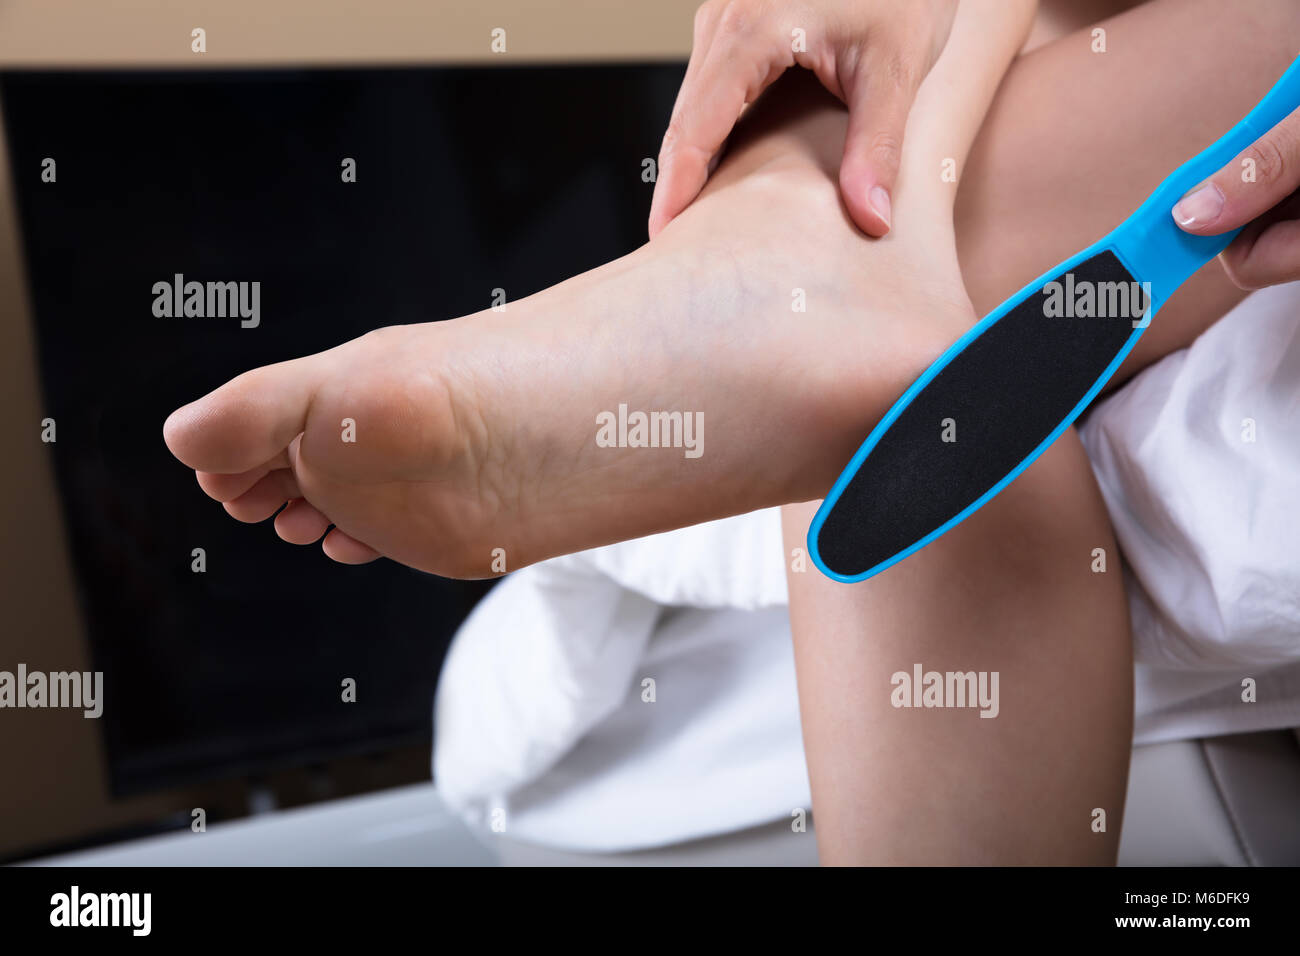 Close-up Of Woman Filling Foot With Foot File Stock Photo